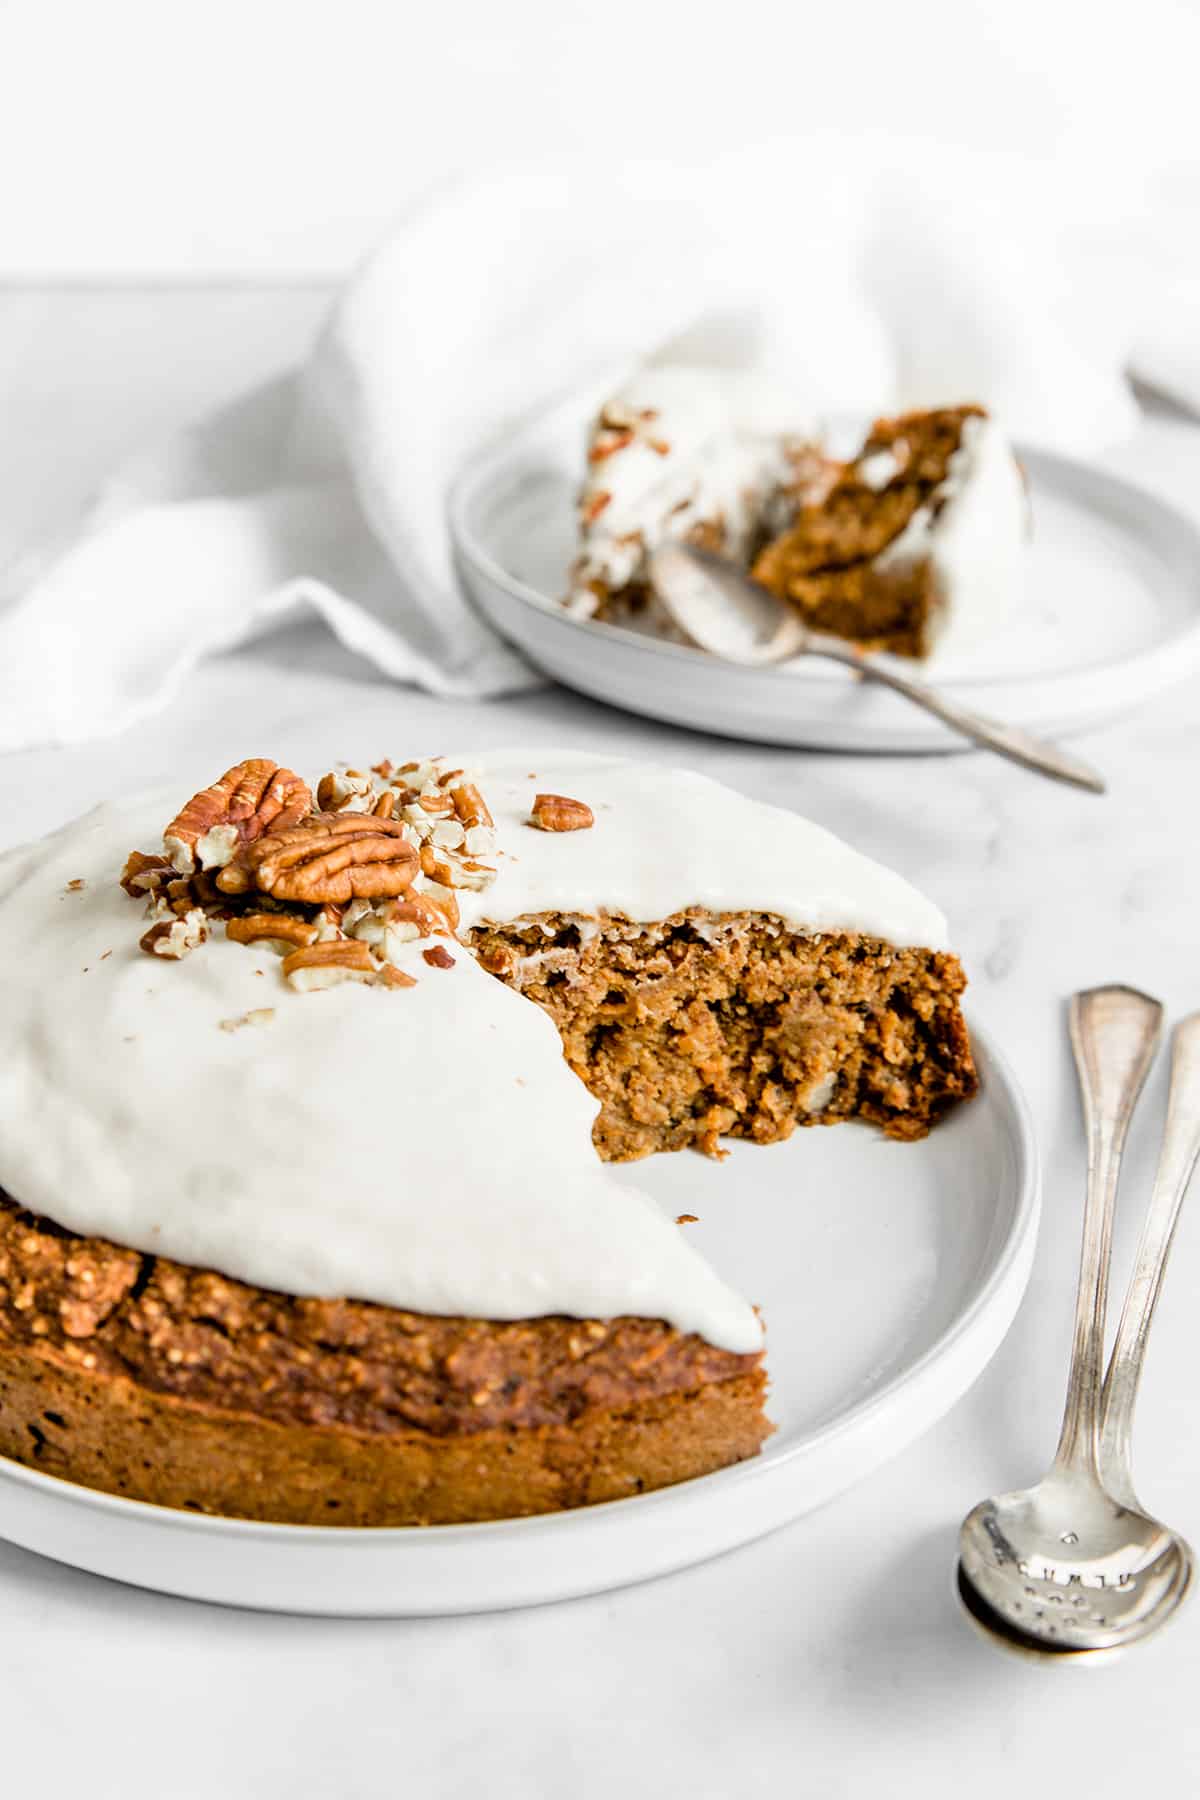 EASY AND HEALTHY CARROT CAKE | Healthy Foodie Girl